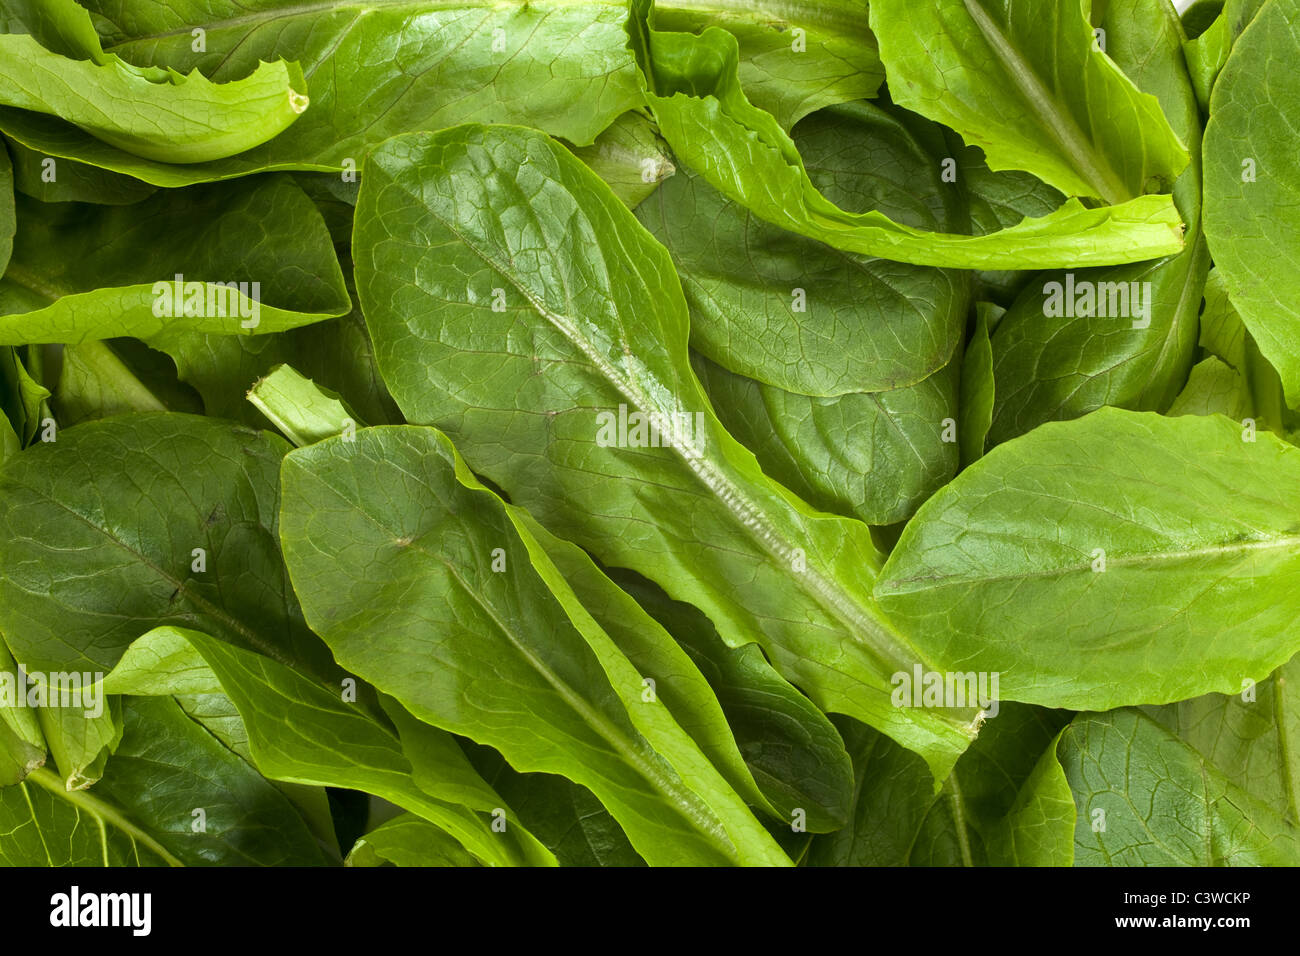 Salad Spinach for background Stock Photo